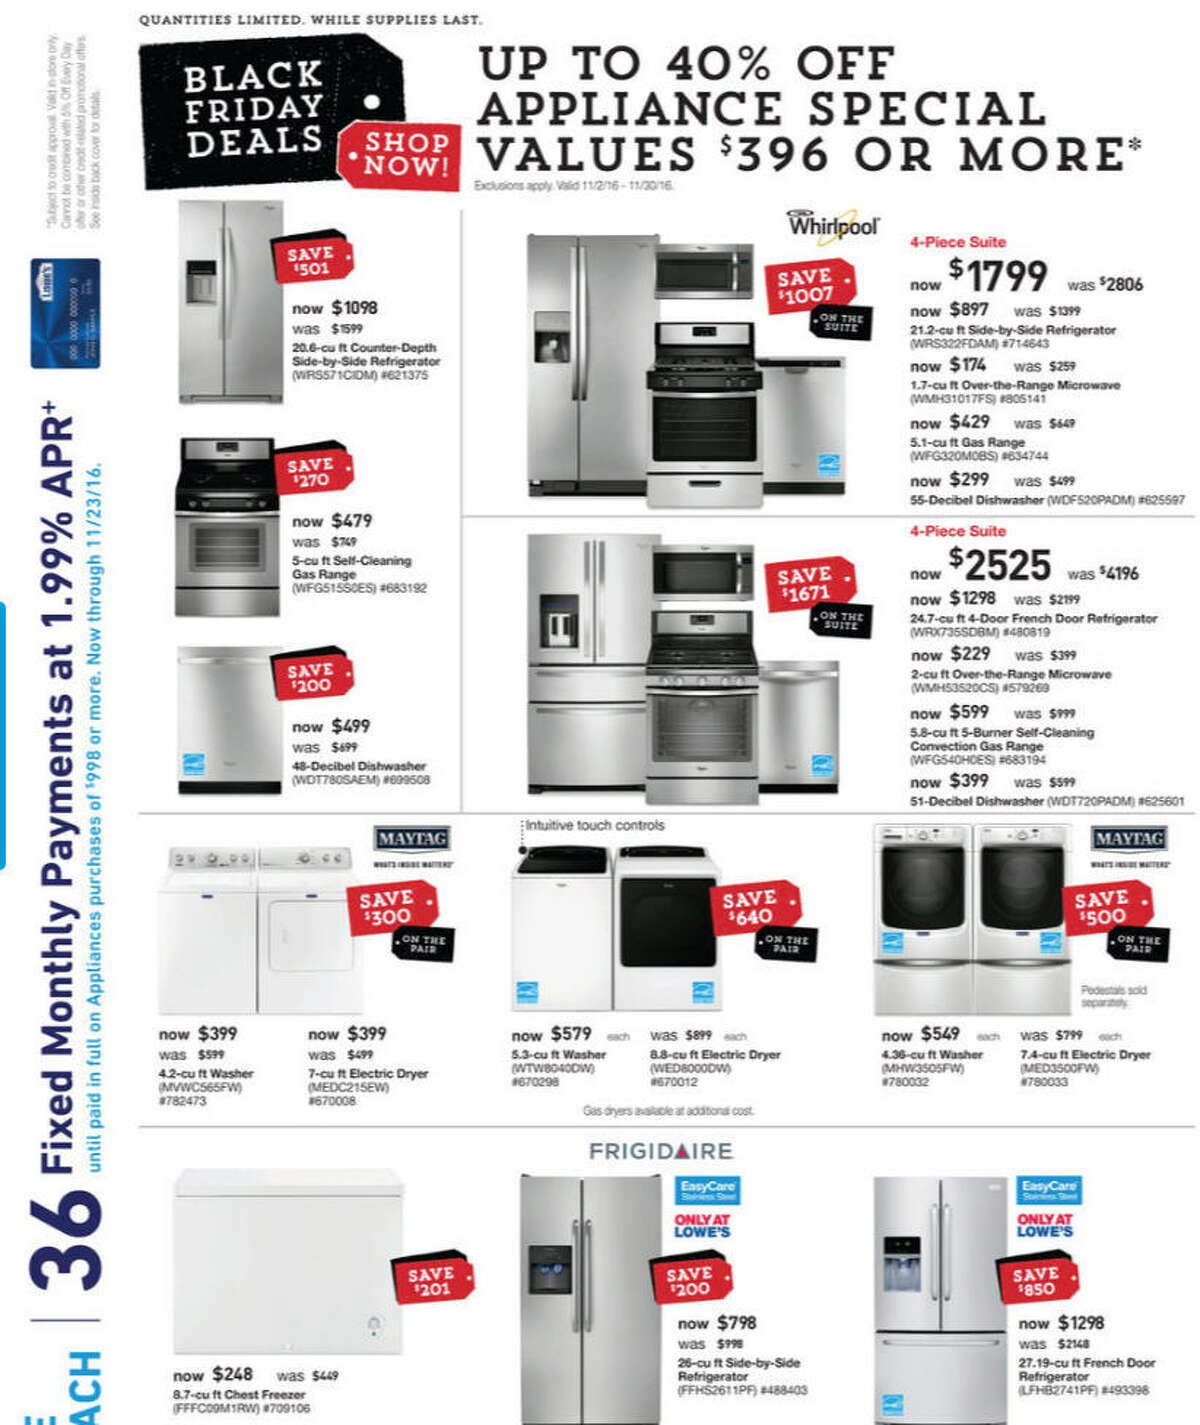 Lowe's 2016 Black Friday ad released (see all 8 pages)